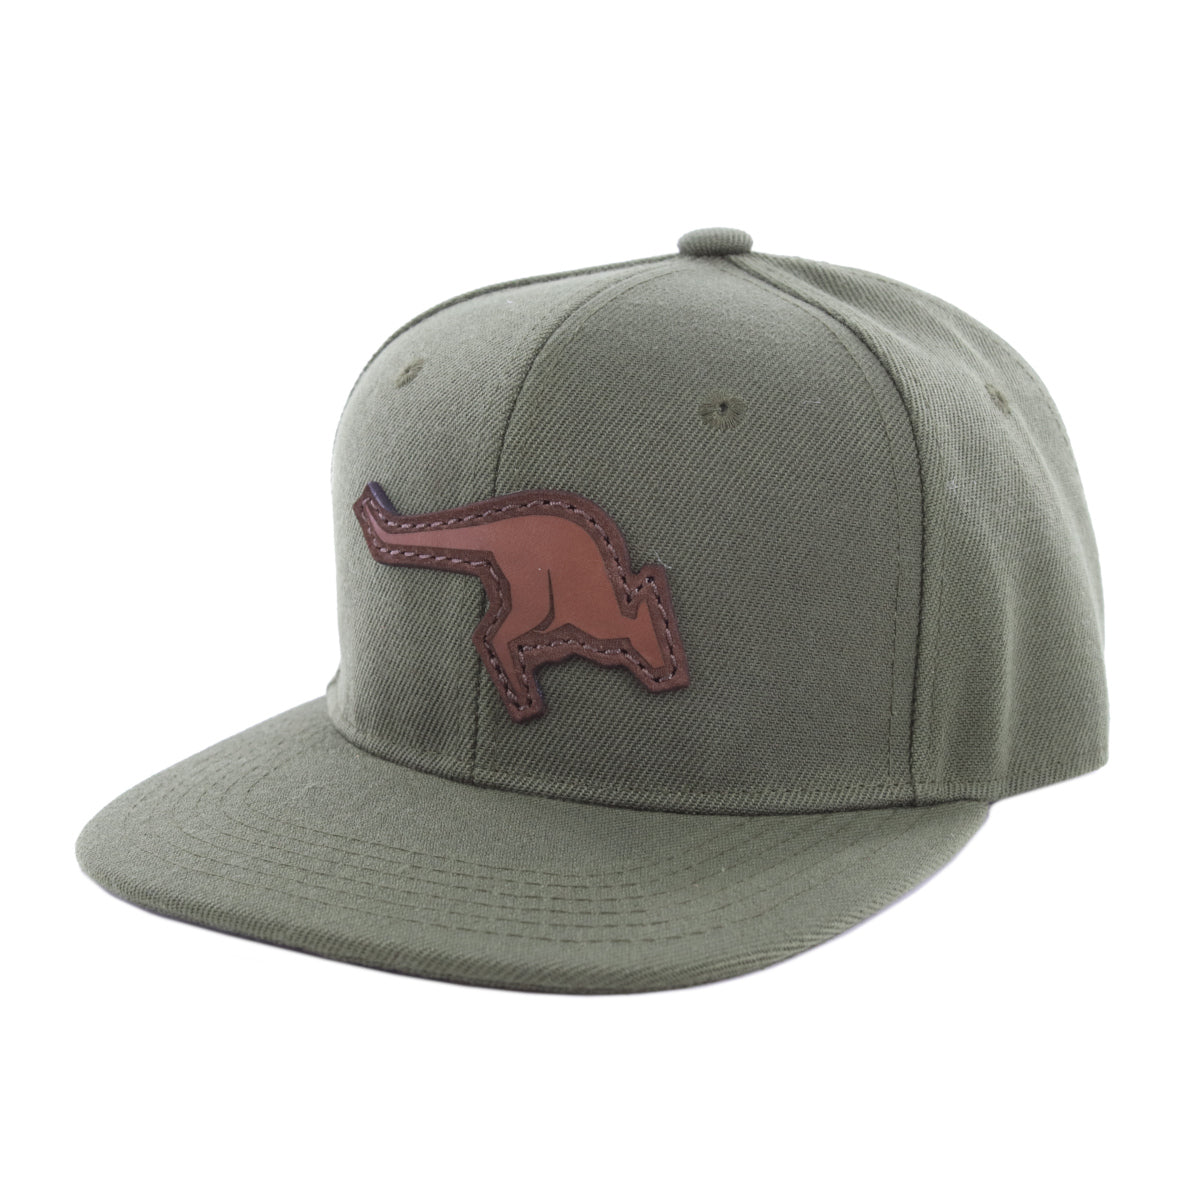 Youth Hat - Youth Kangaroo Leather Patch - Marsupial Gear